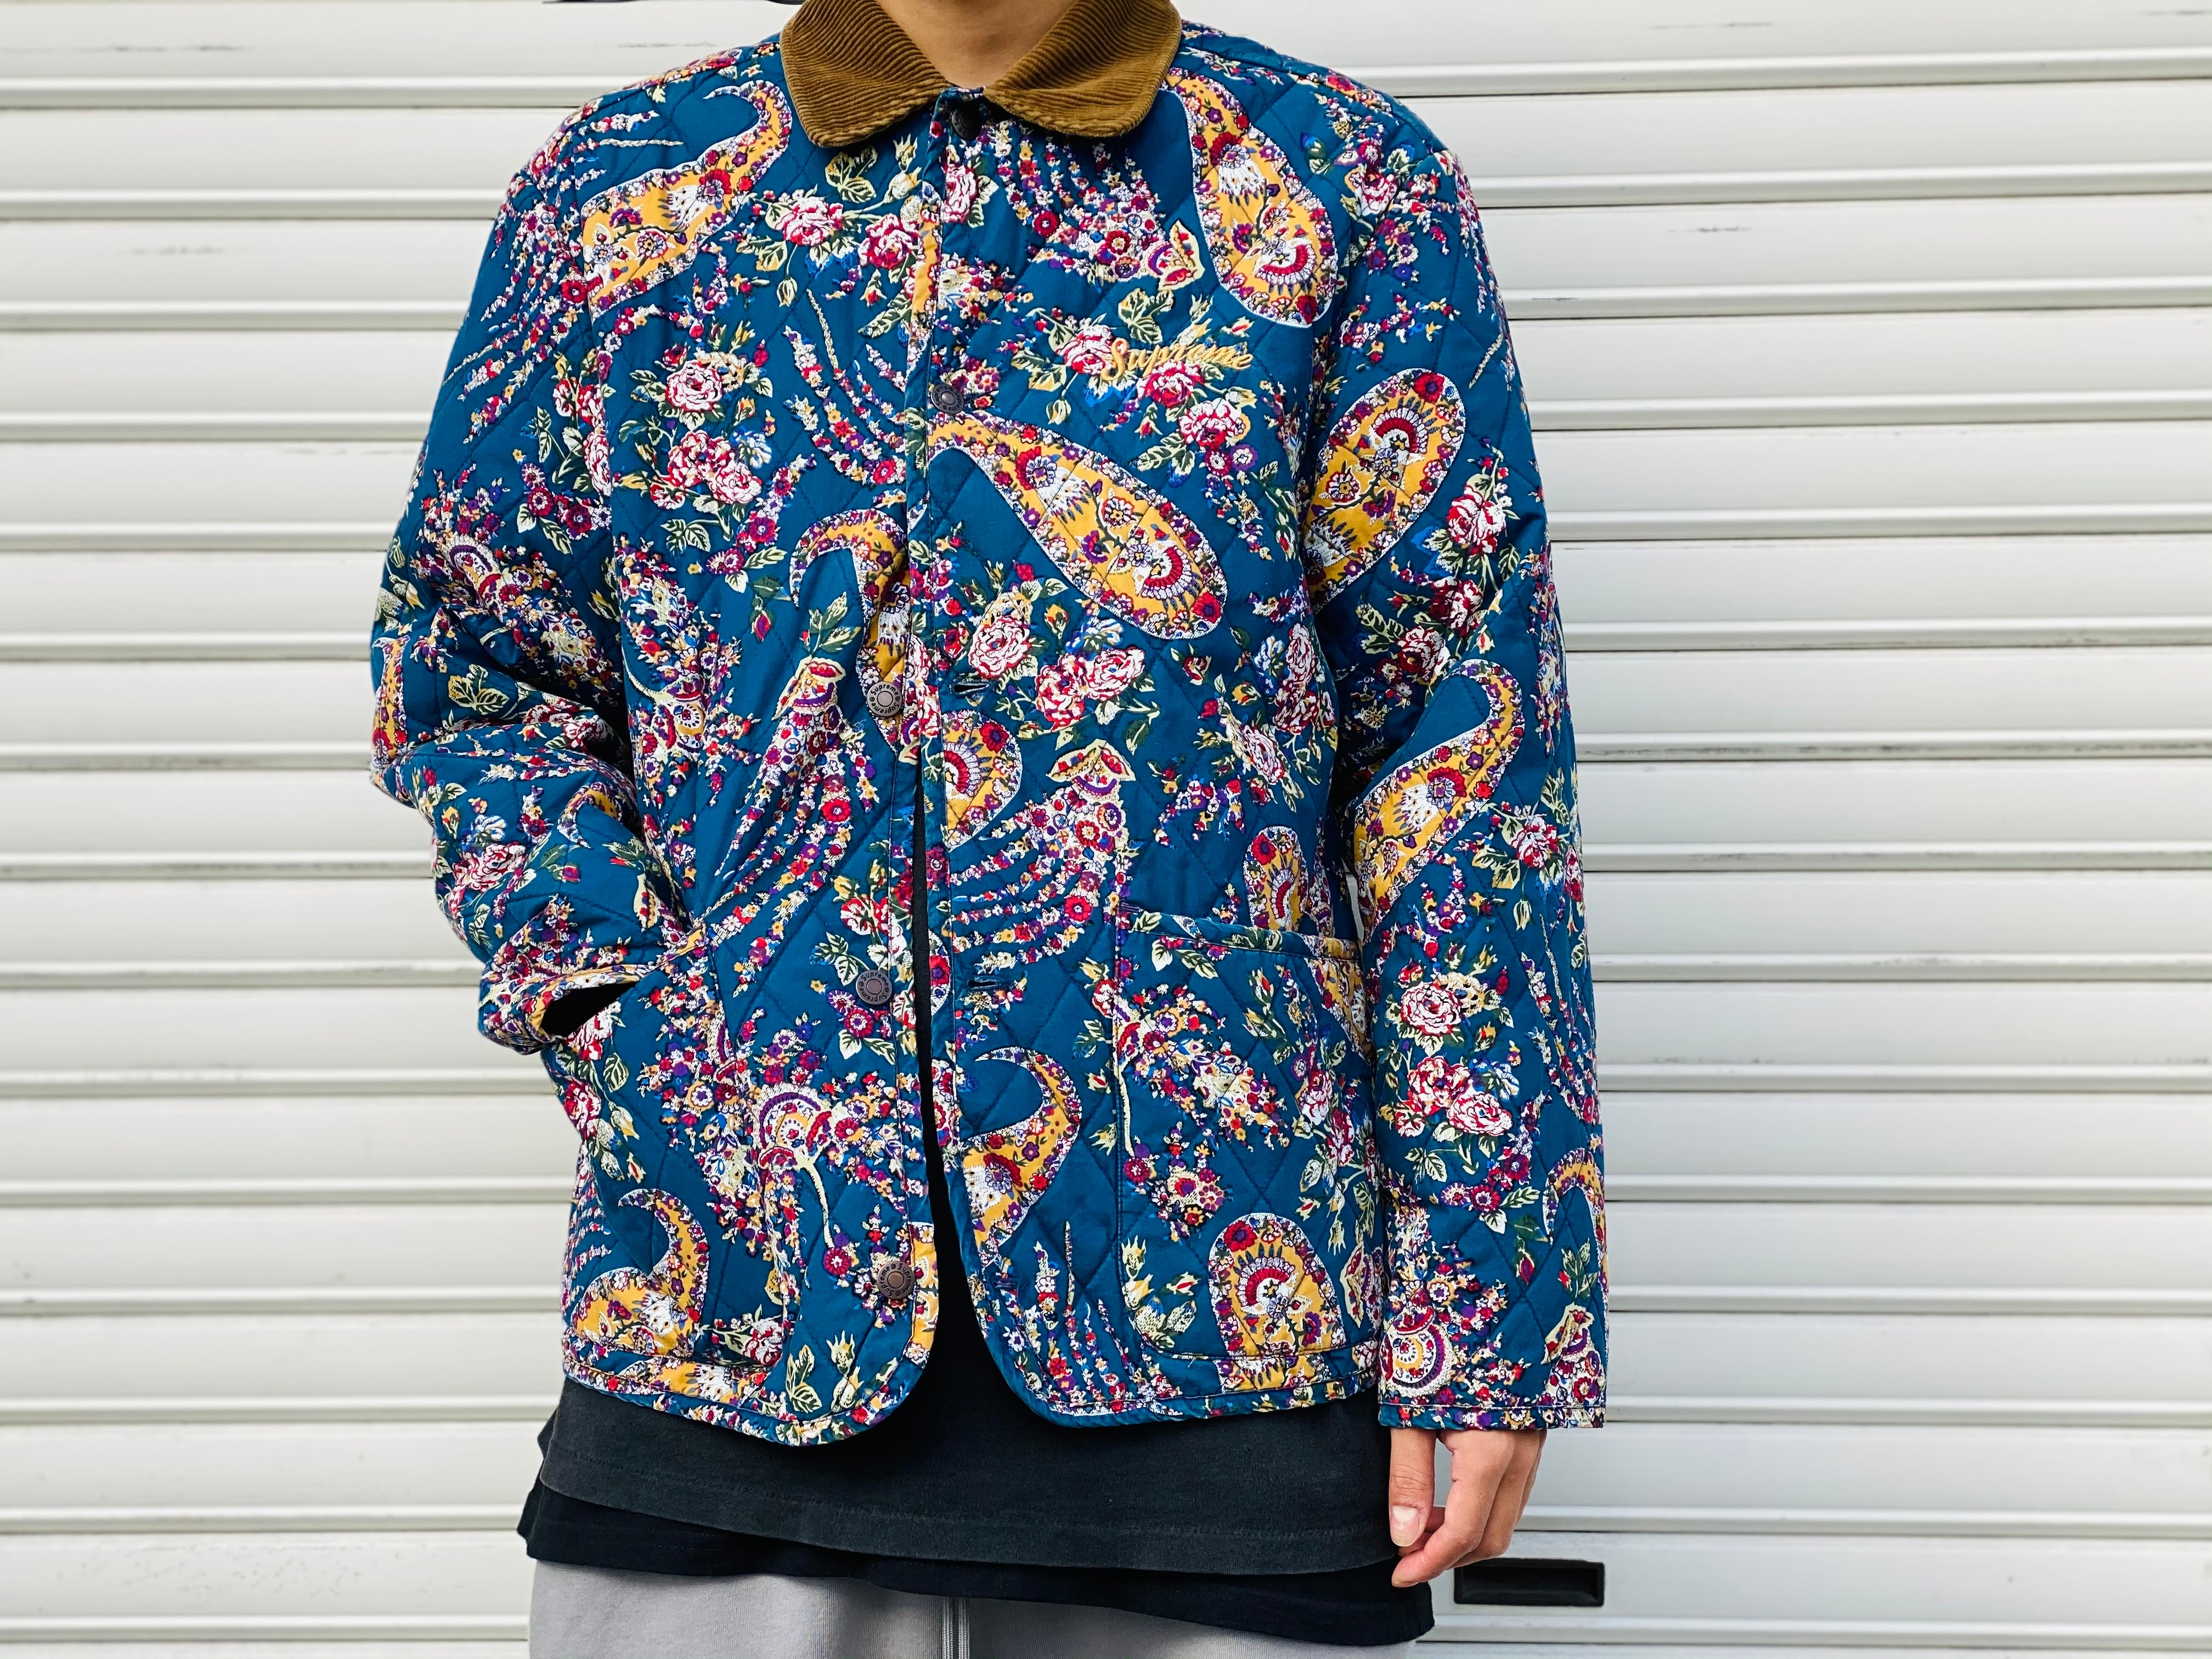 Supreme Quilted Paisley Jacket M size